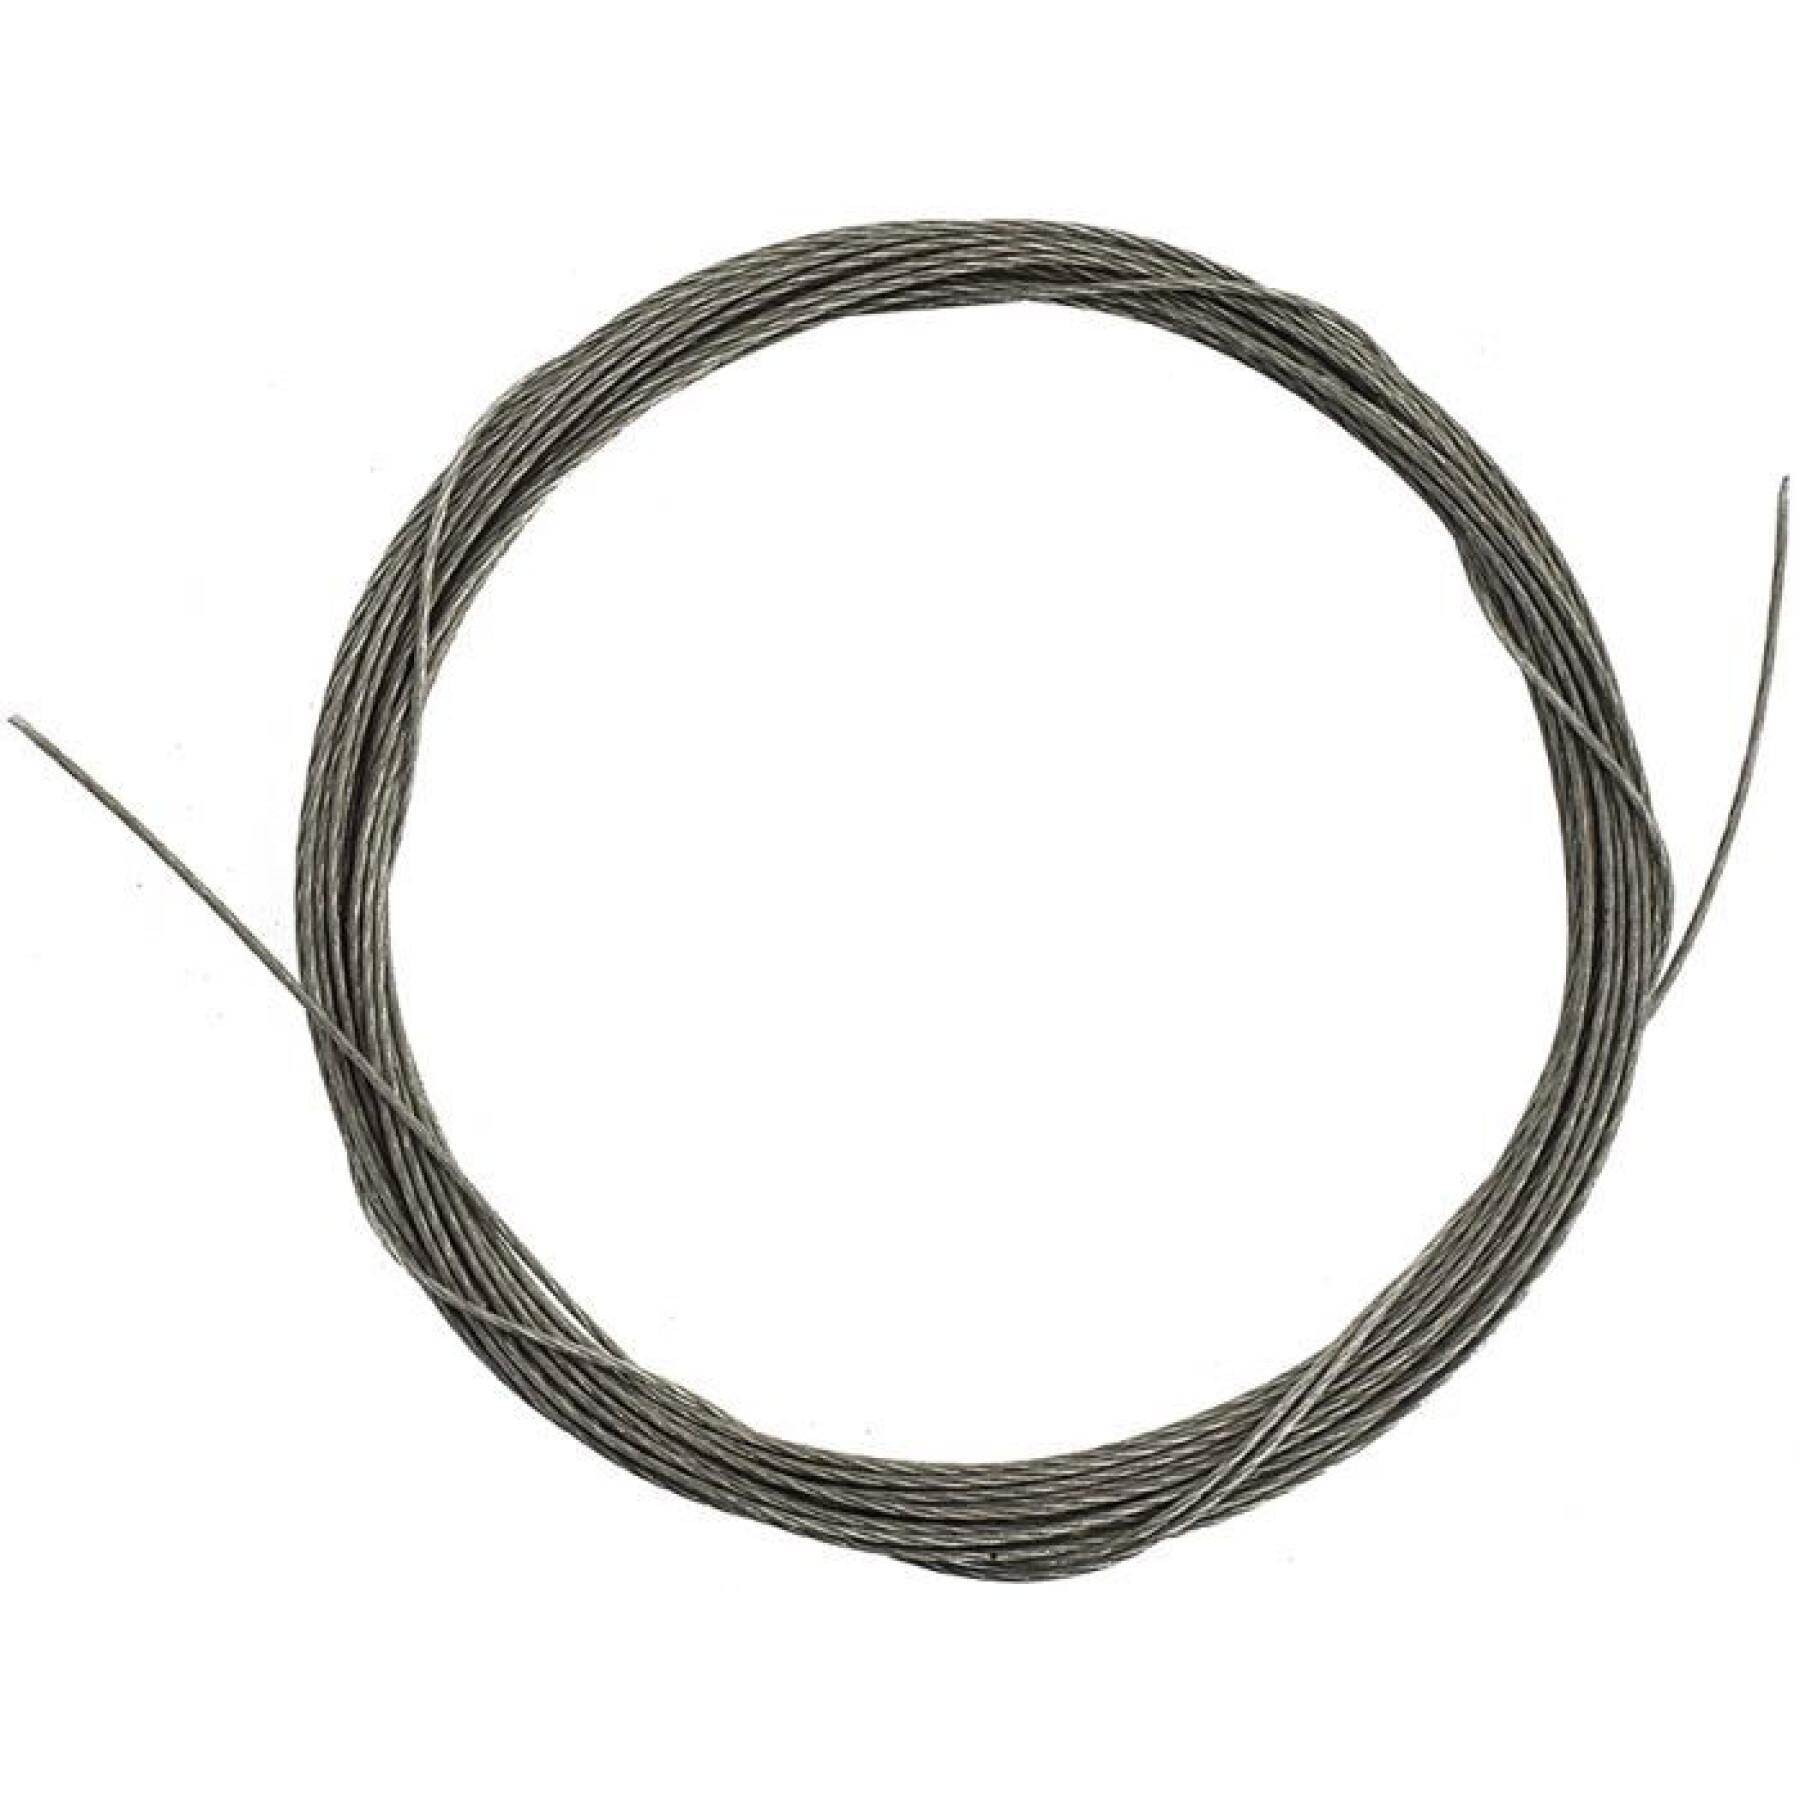 Footer Decoy Wl 70 N Coated Wire 48